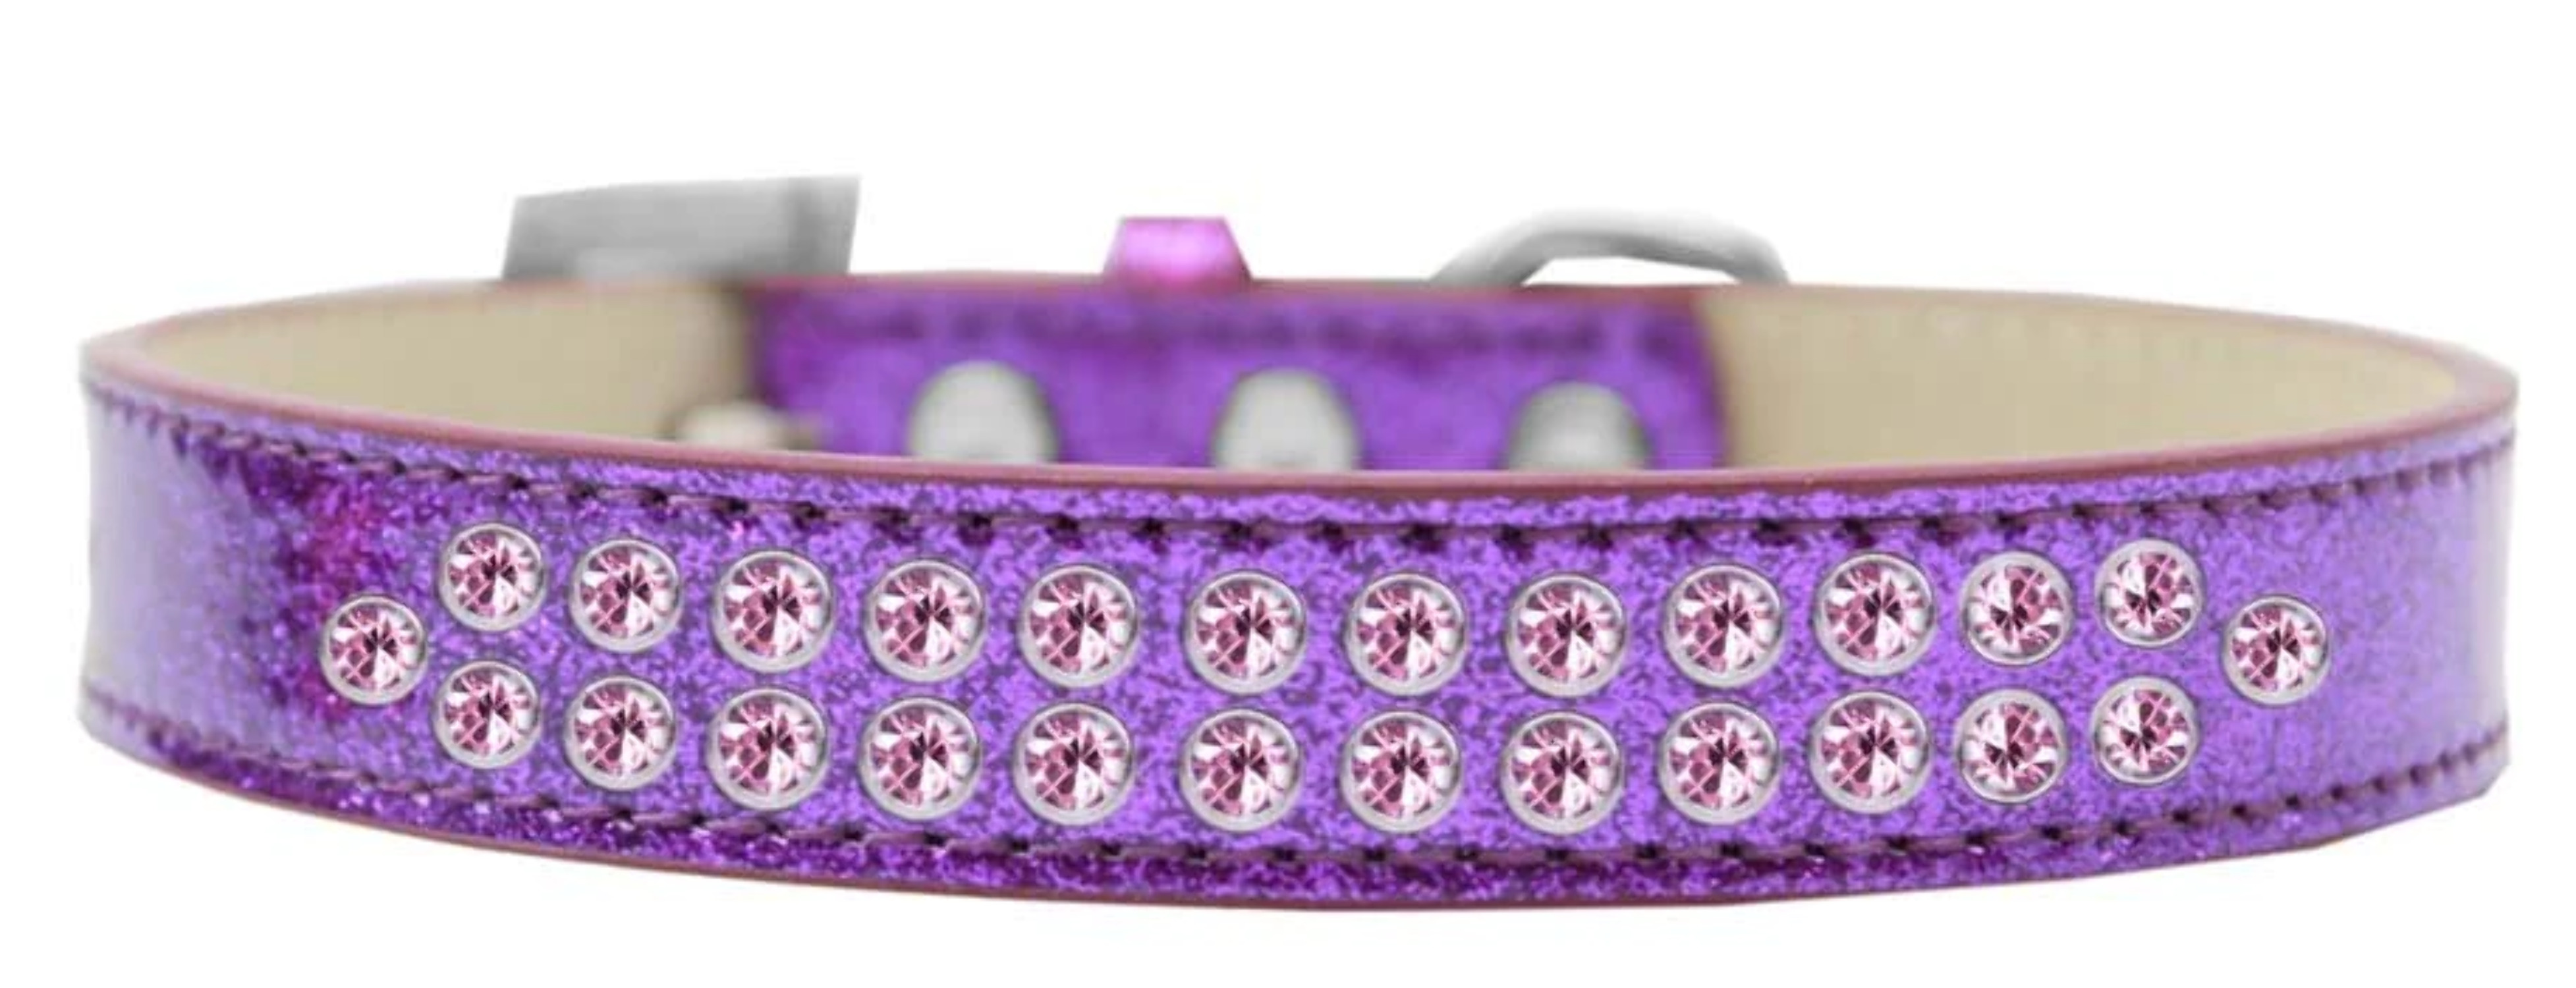 Mirage Pet Products614-06 PK-12 Two Row Light Pink Crystal Dog Collar, Pink Ice Cream - Size 12 - image 5 of 5